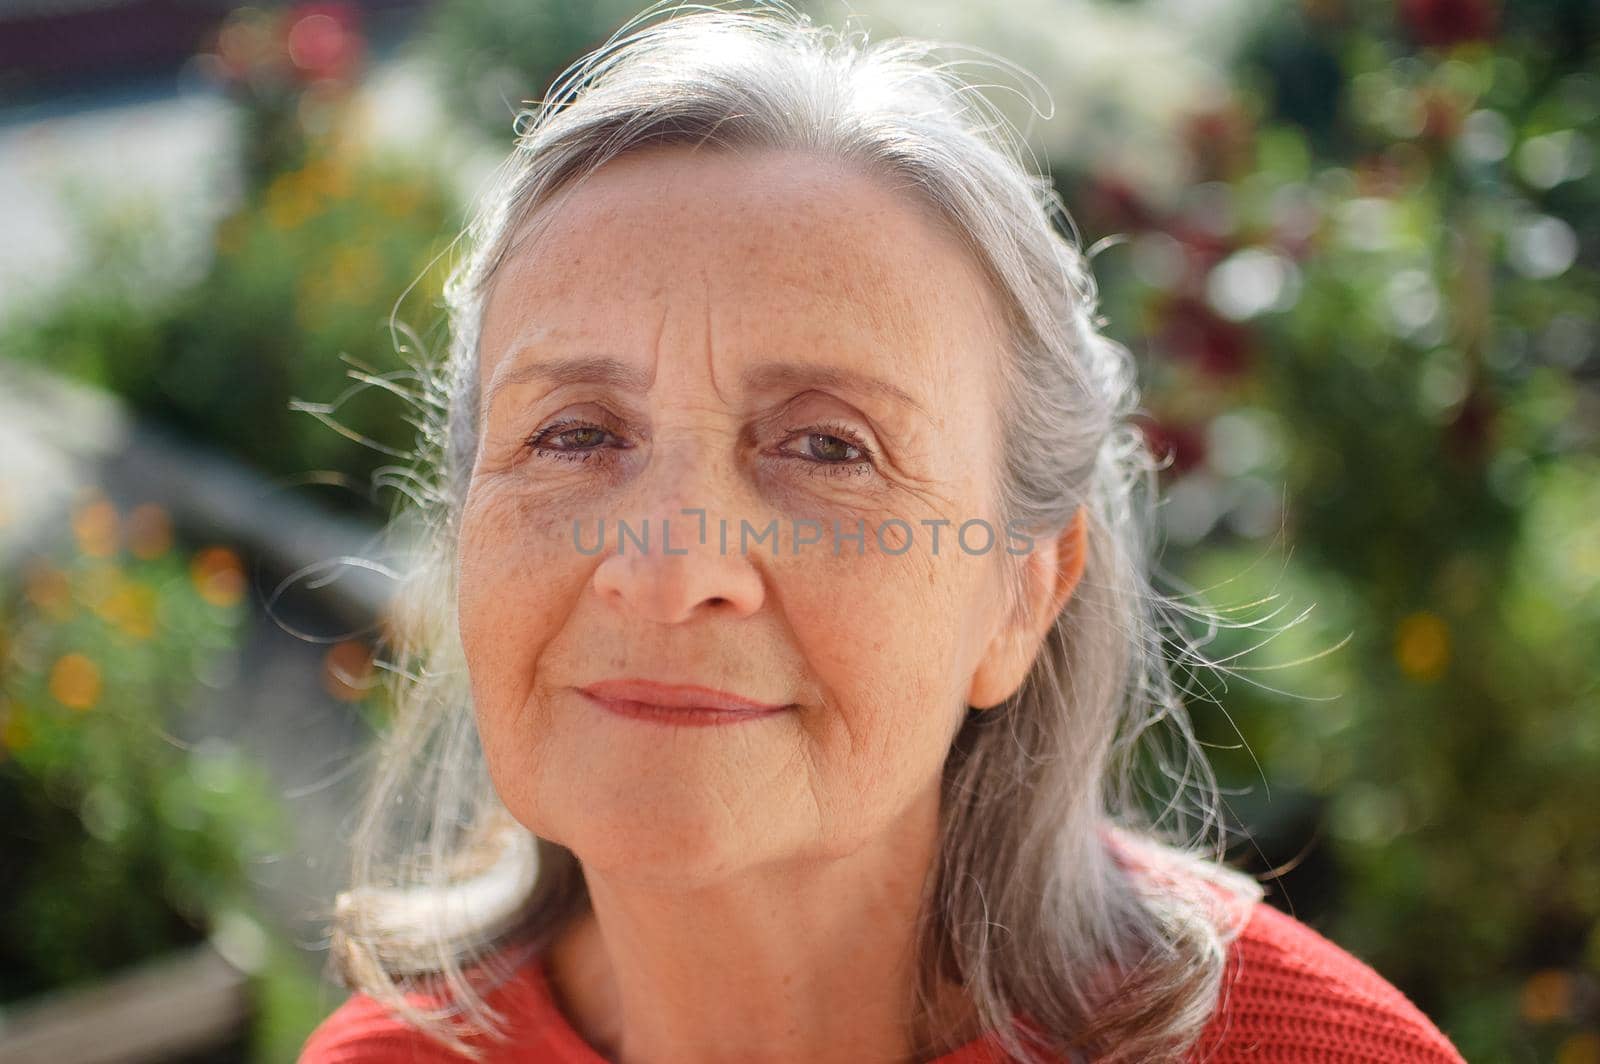 Portrait of a mature woman with grey hair spending time outdoors during sunny day, happy retirement.